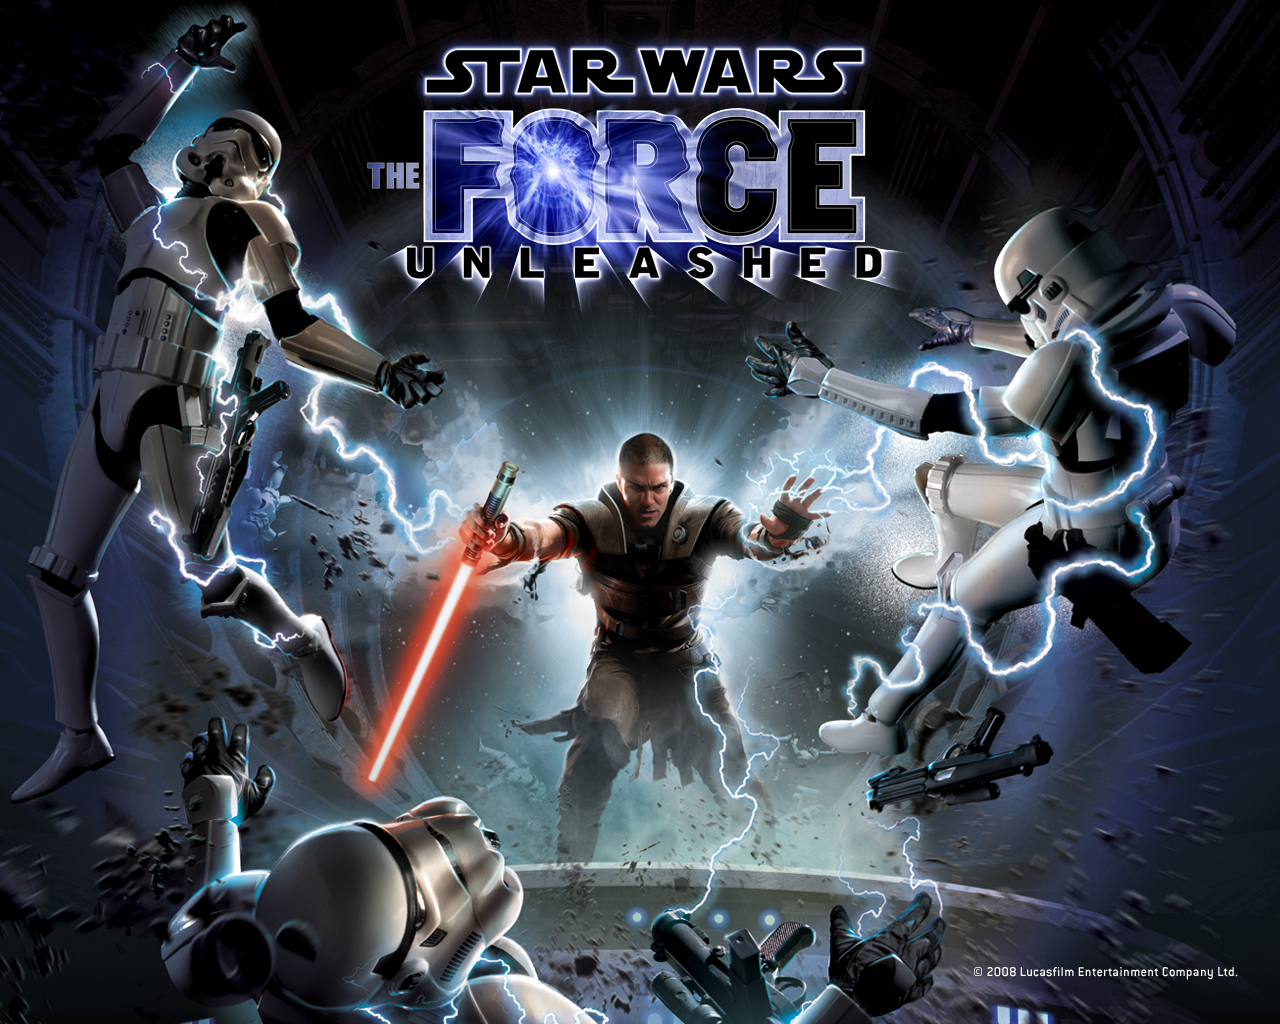 star wars: the force unleashed, video game